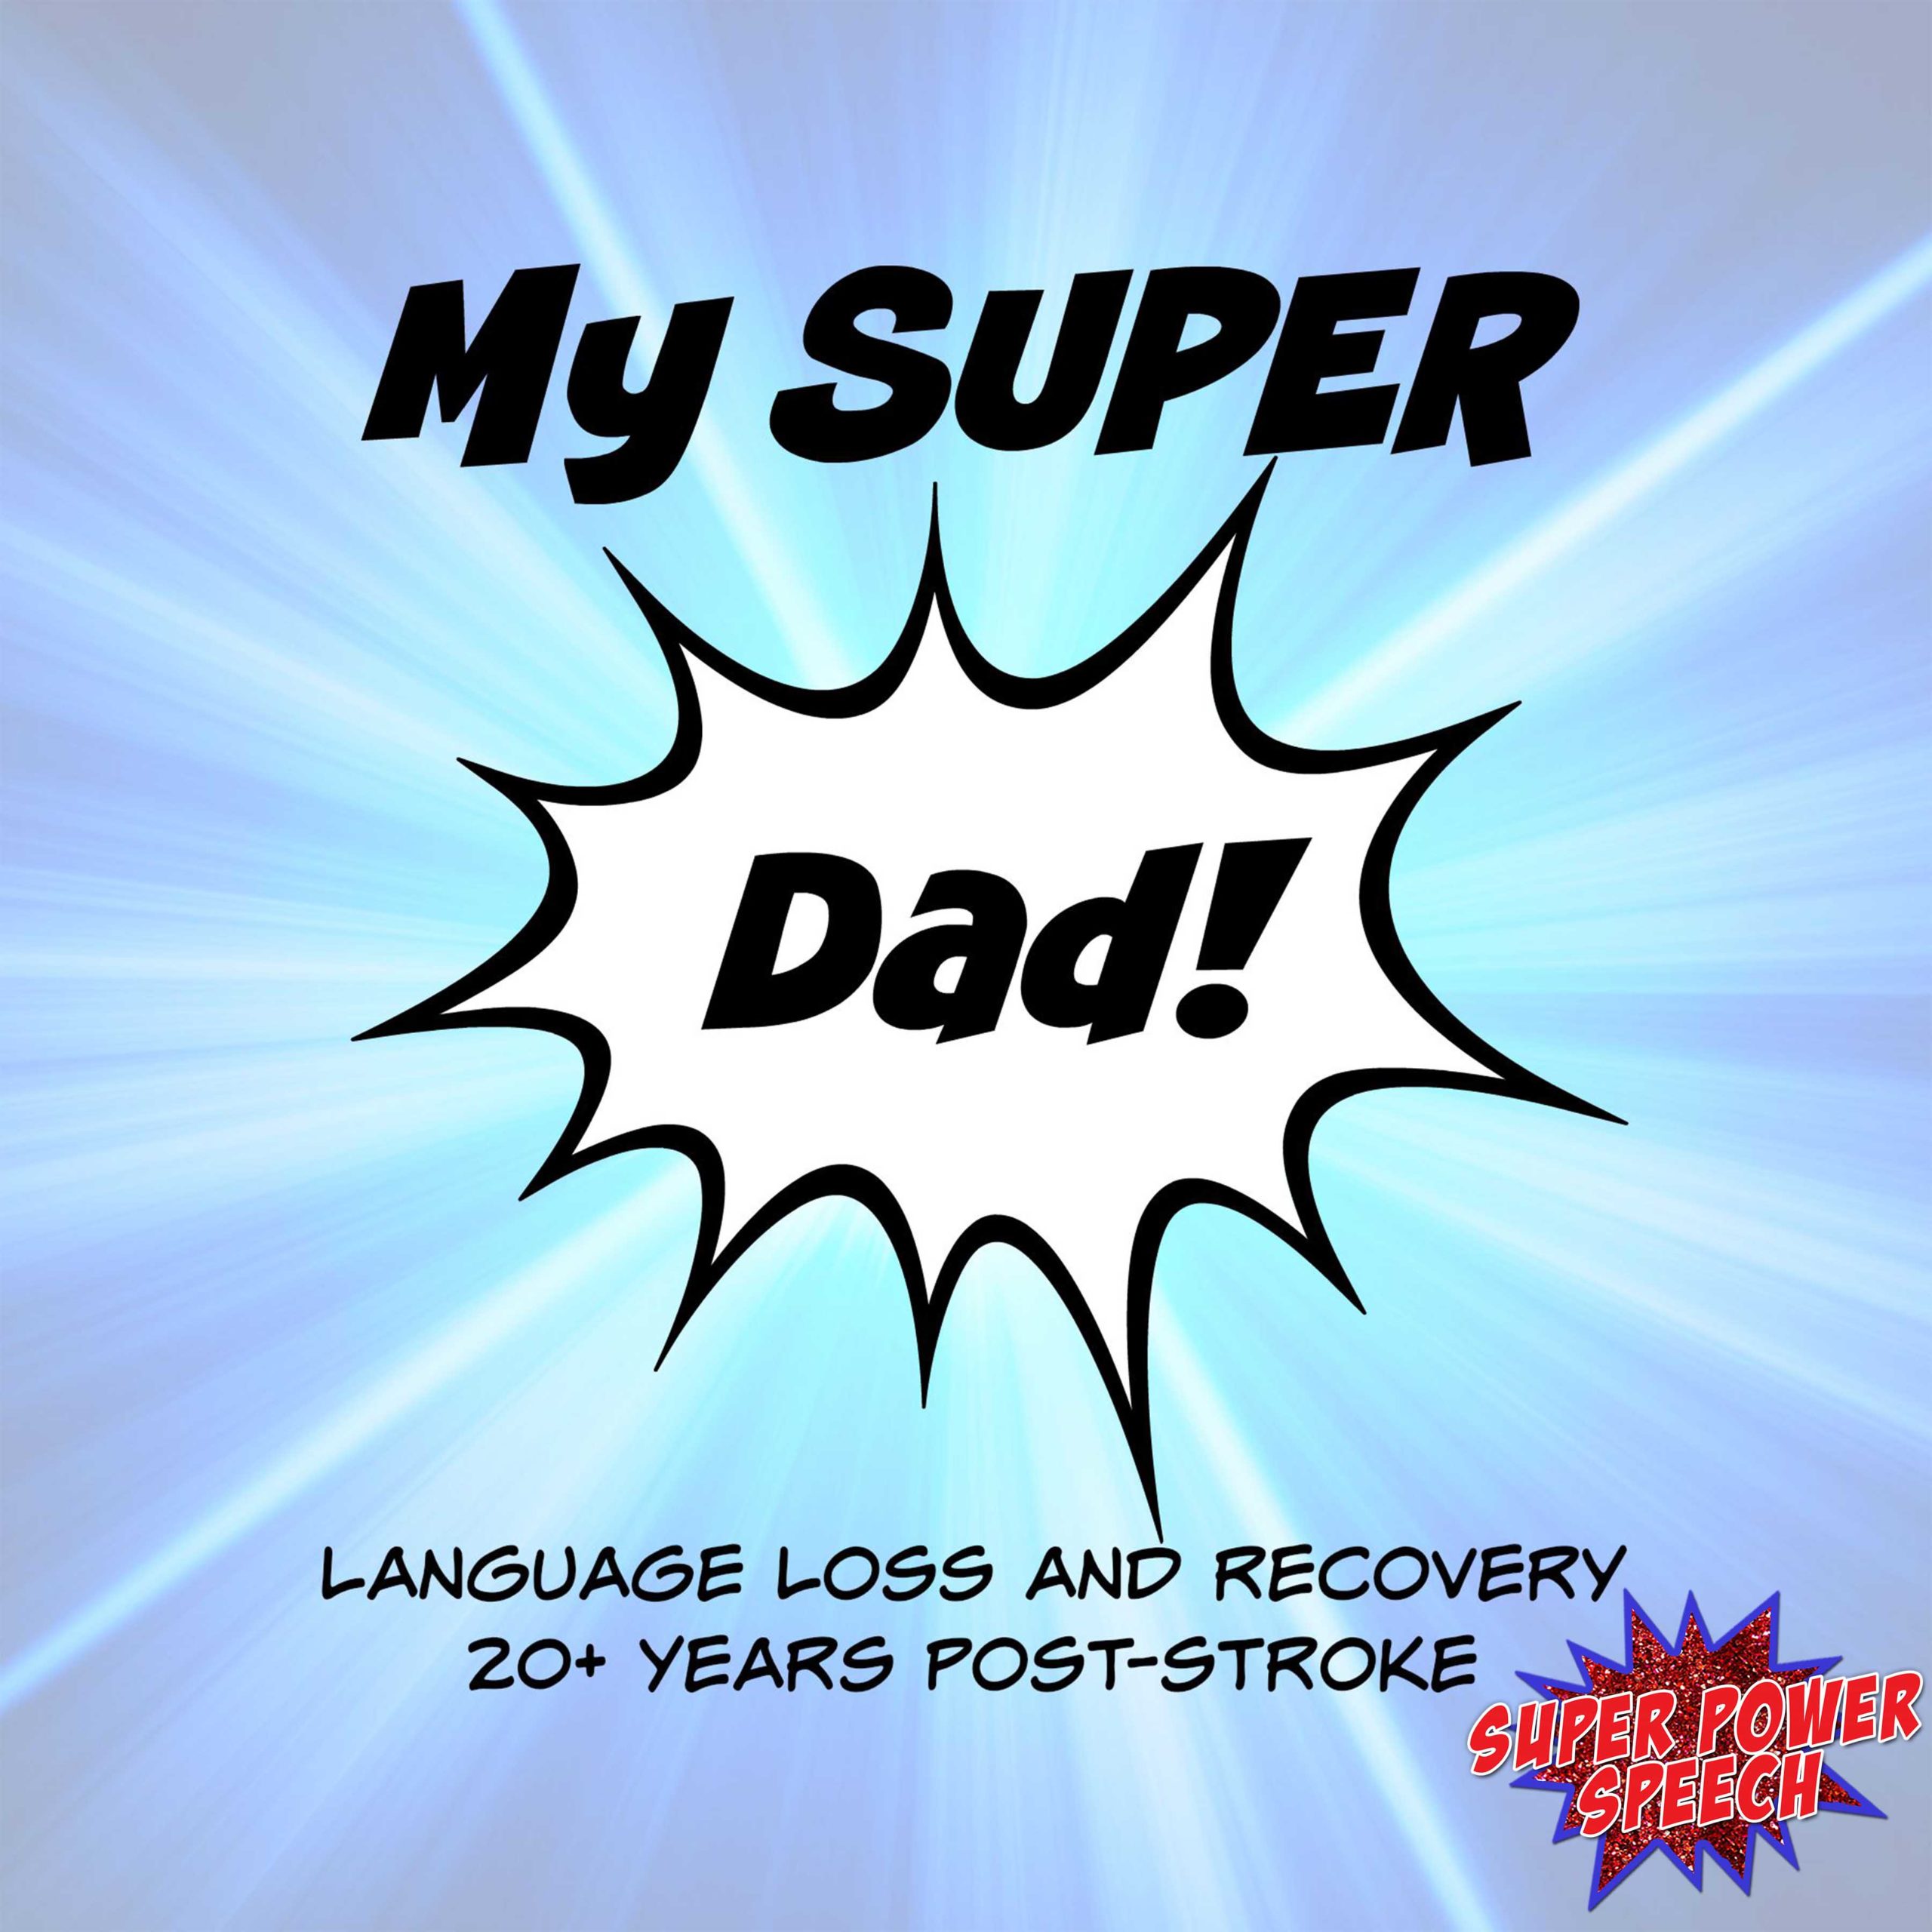 My Super Dad: 20+ Years Post-Stroke